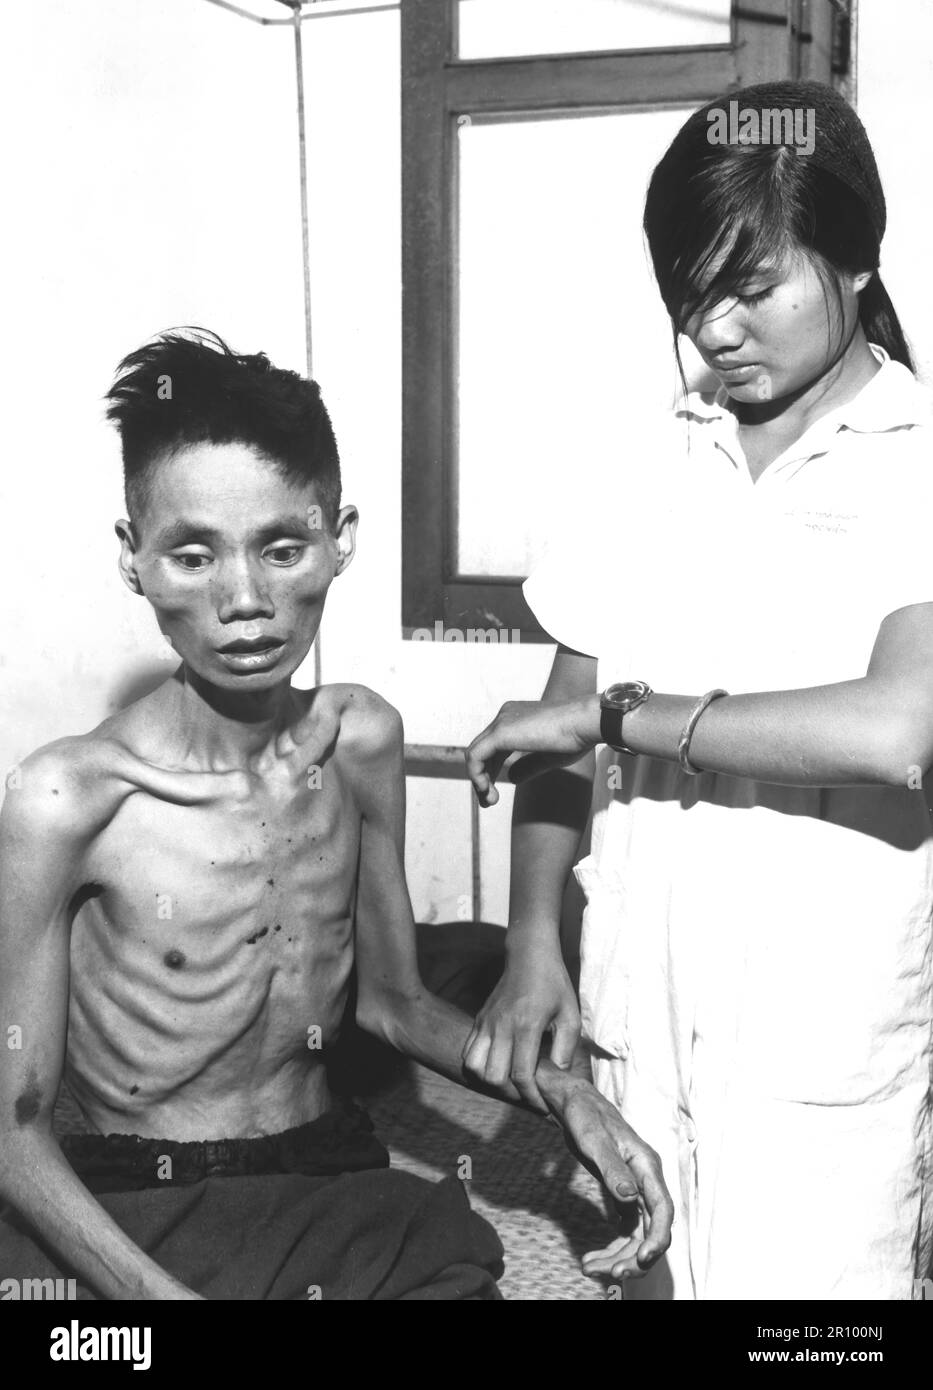 The effects of just one month spent in a Viet Cong prison camp show on 23-year-old Le Van Than, who had defected from the Communist forces and joined the Government side, was recaptured by the Viet Cong and deliberately starved.  Circa 1966. Stock Photo